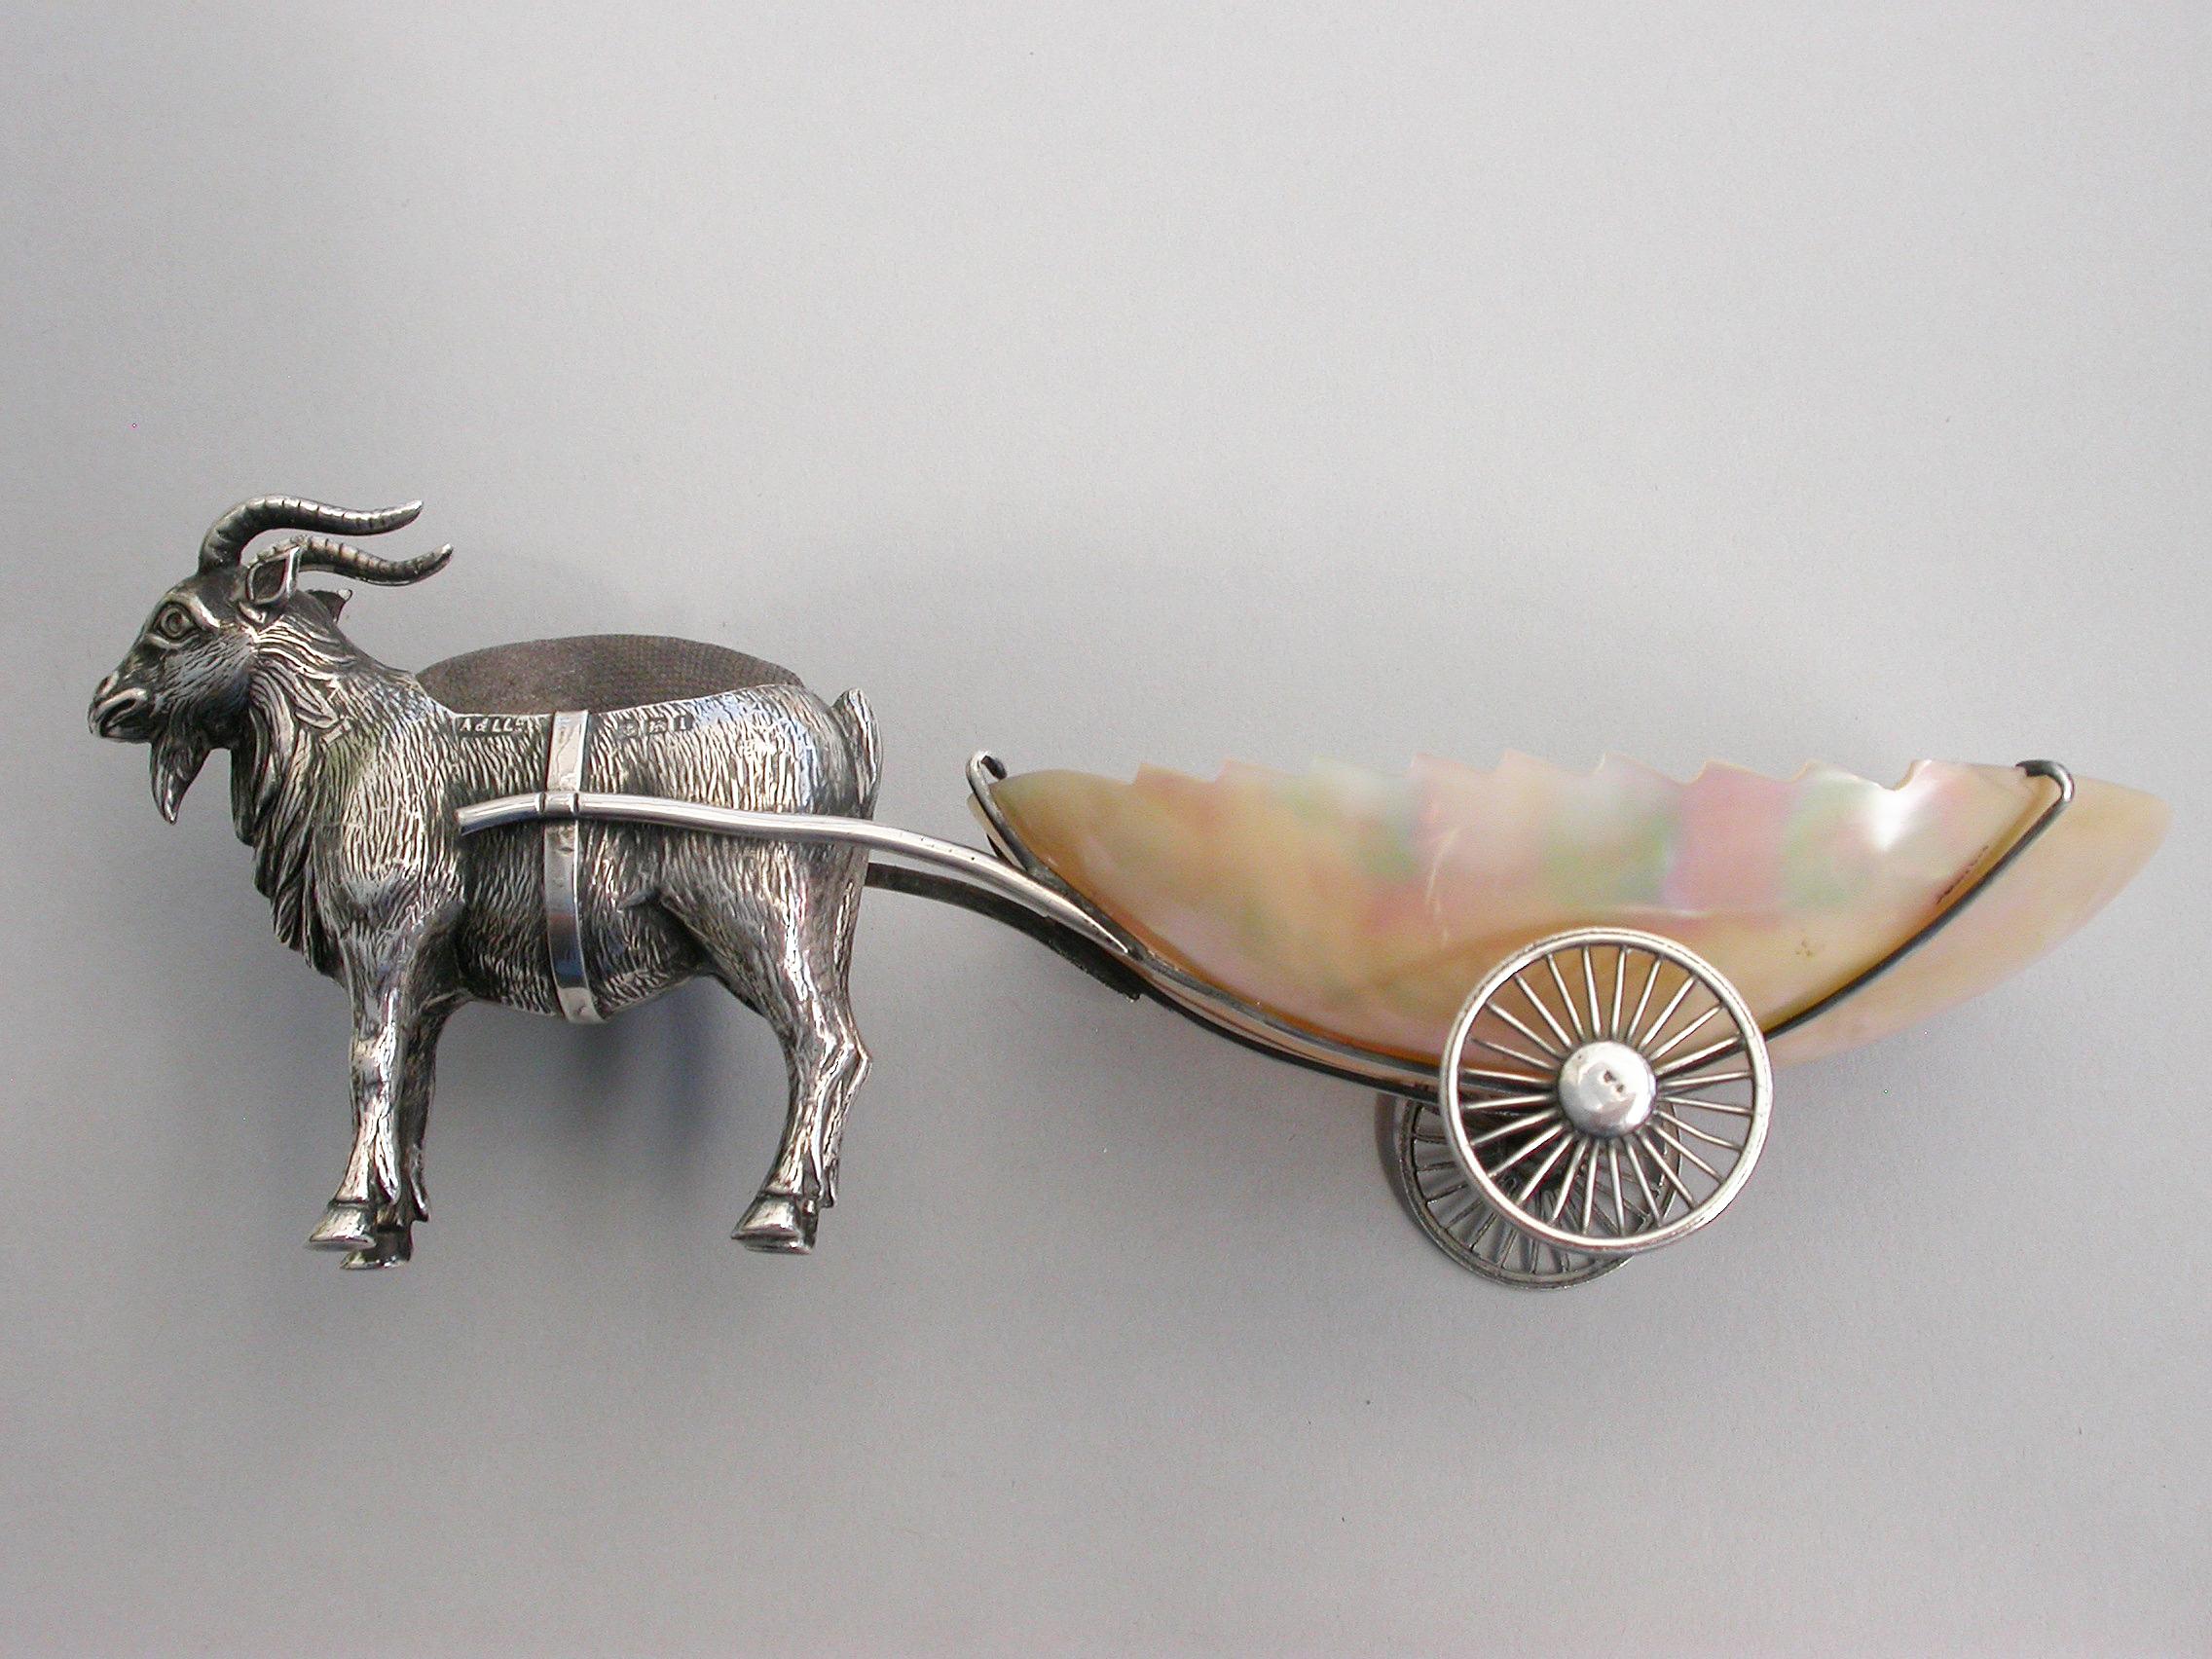 Early 20th Century Edwardian Novelty Silver Goat Pulling a Cart Pin Cushion by Adie & Lovekin, 1908 For Sale